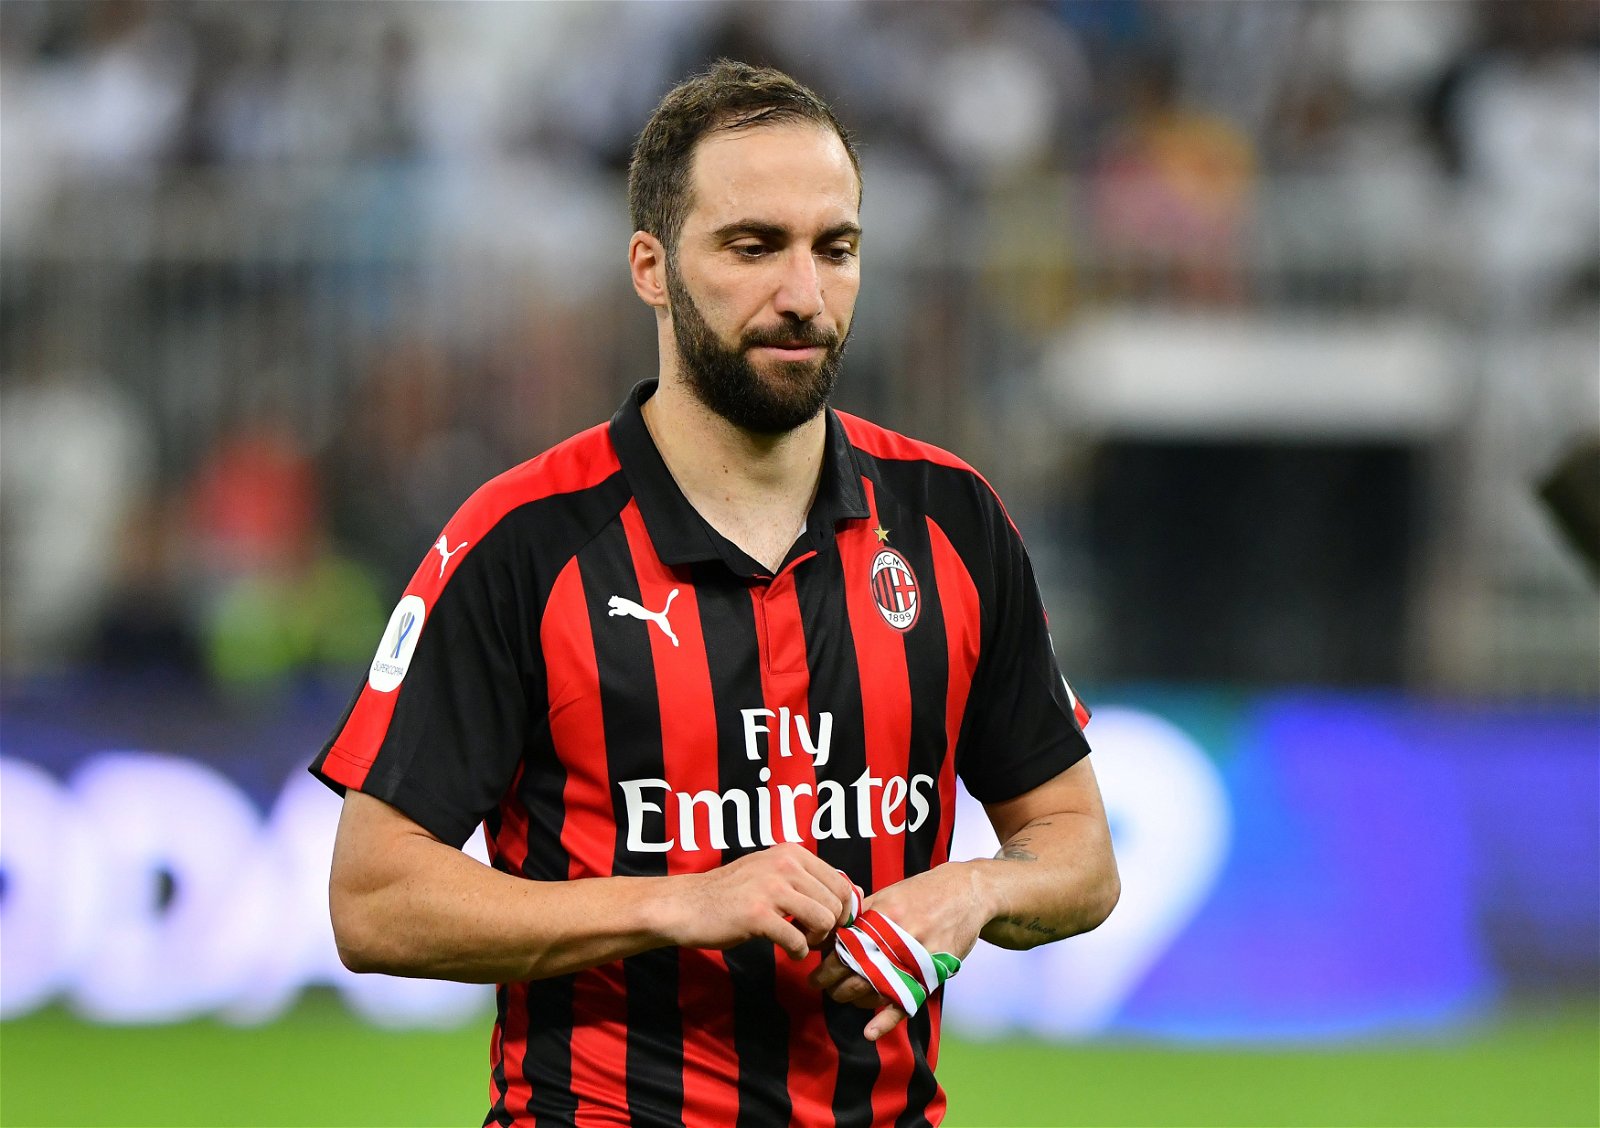 Why Higuain will succeed at Stamford Bridge